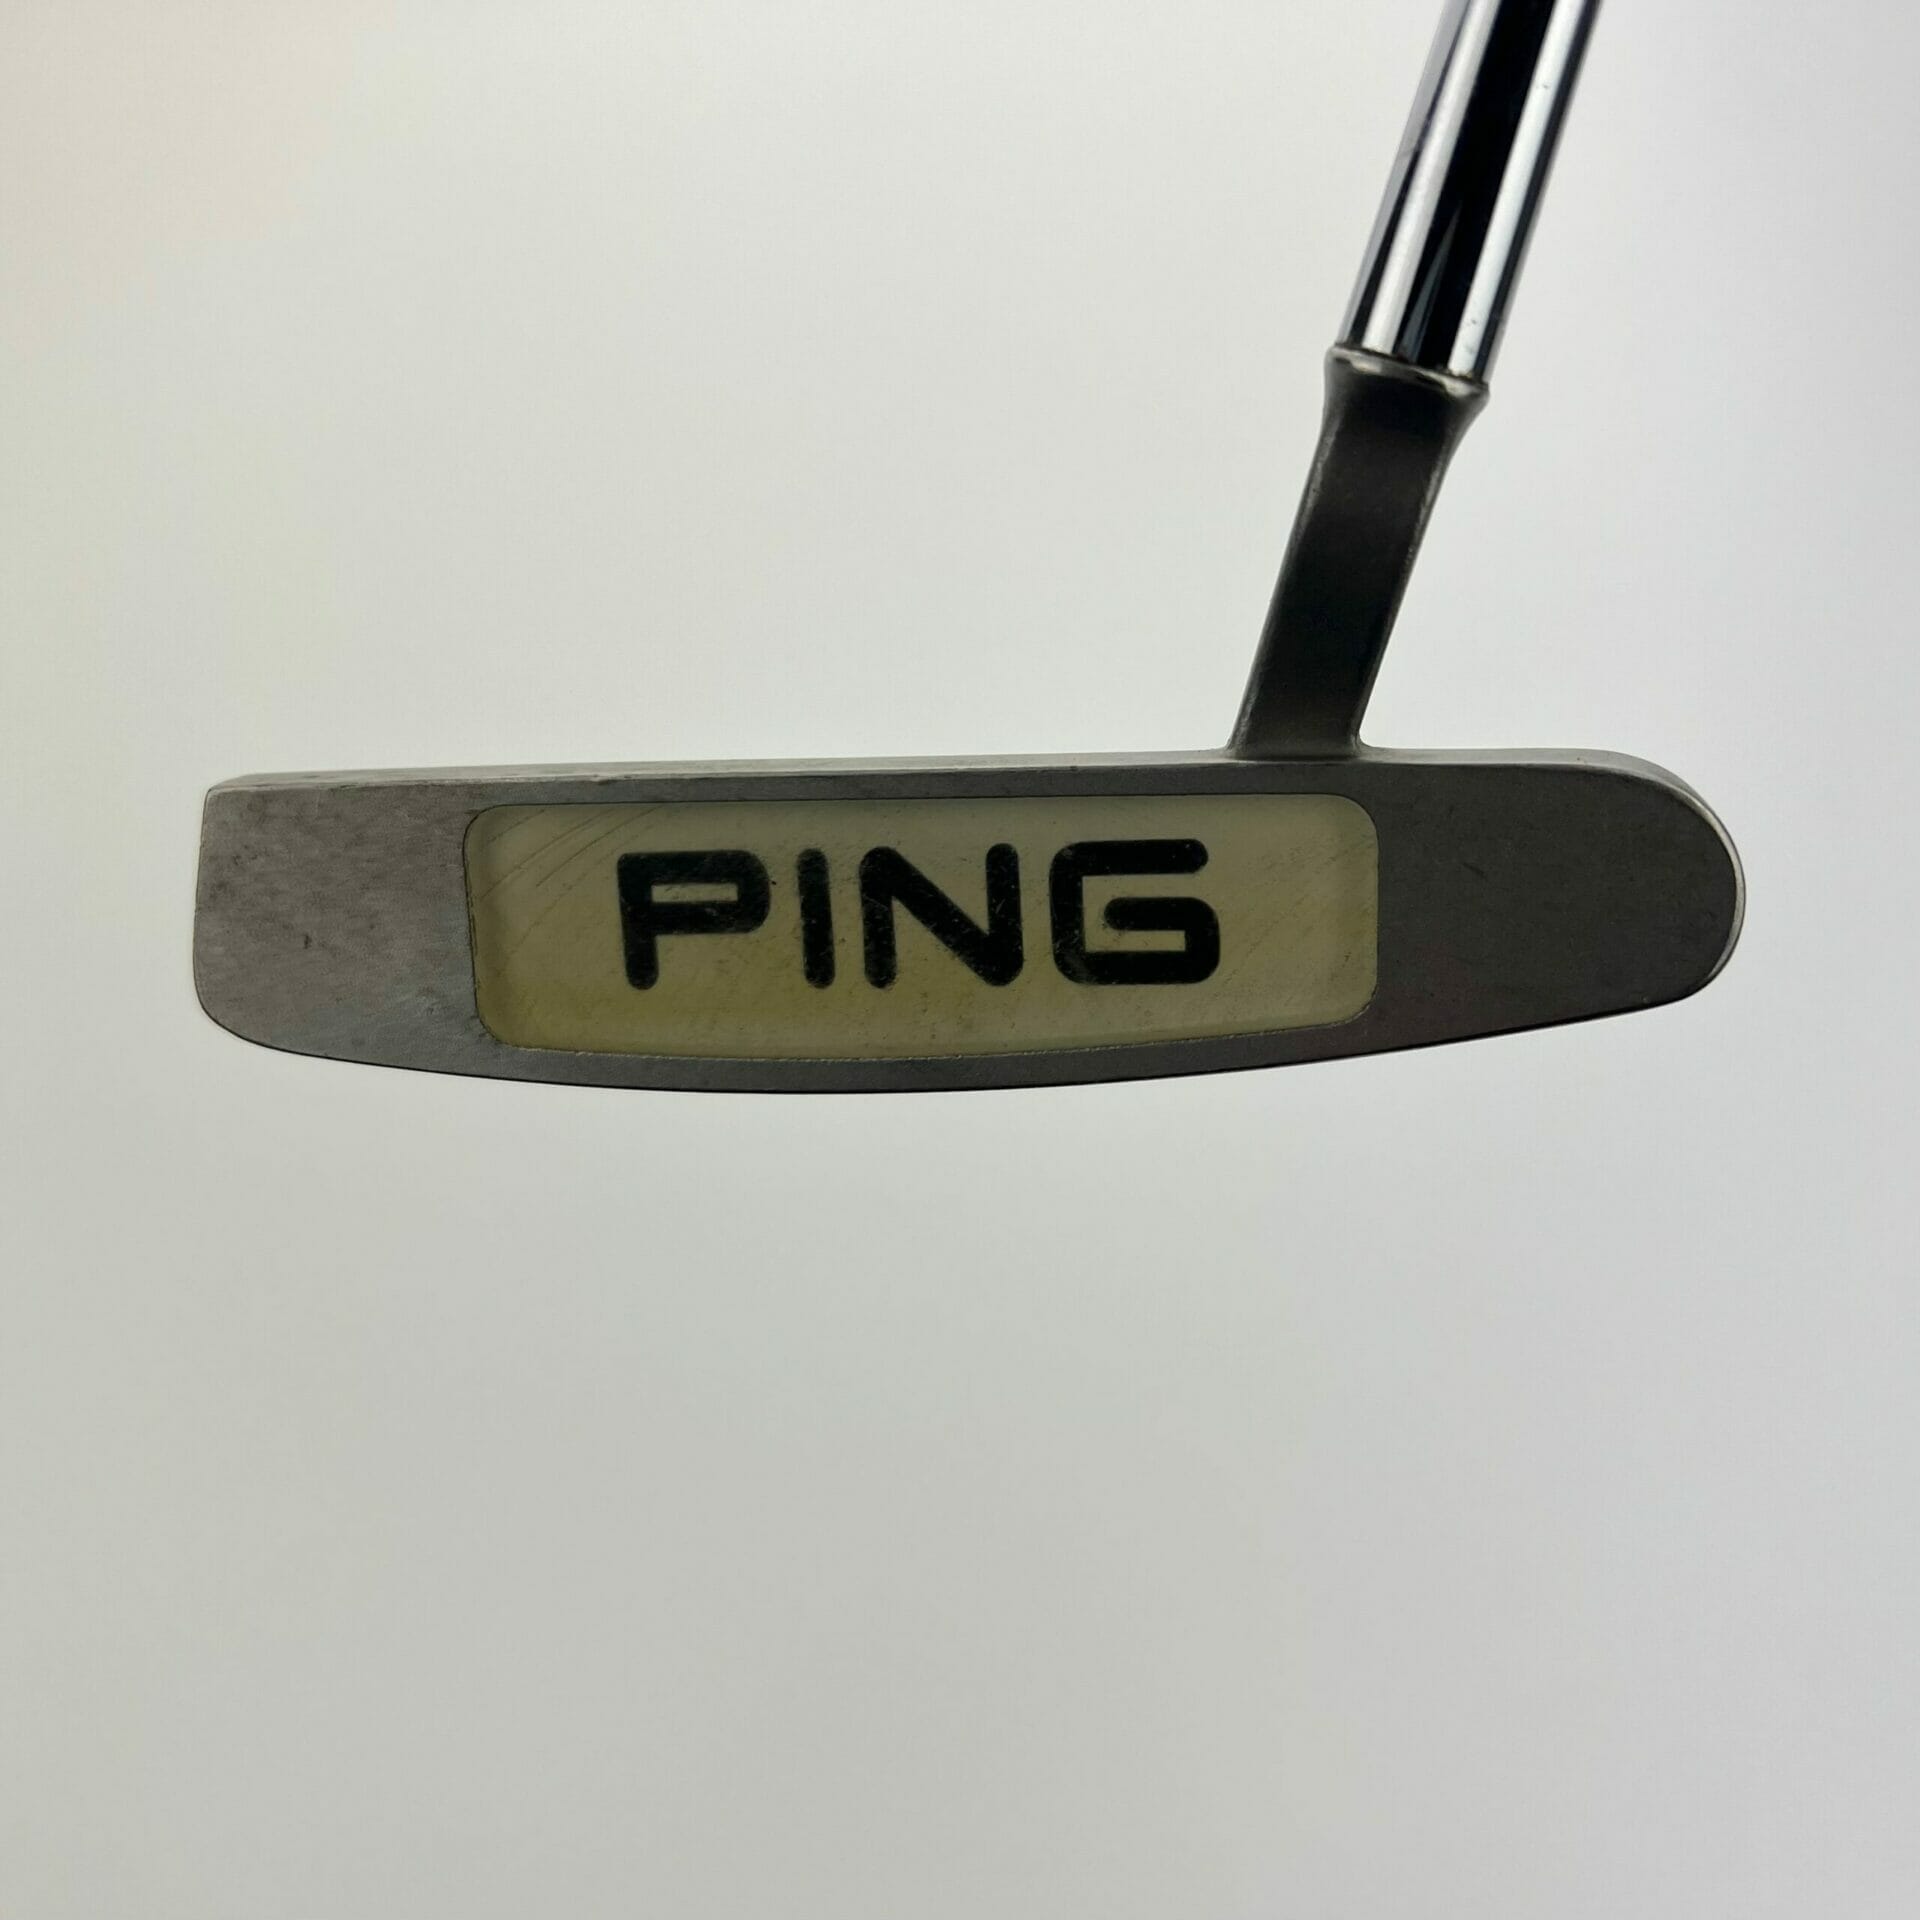 Ping Karsten Zing 2i Putter / 34.5 Inches